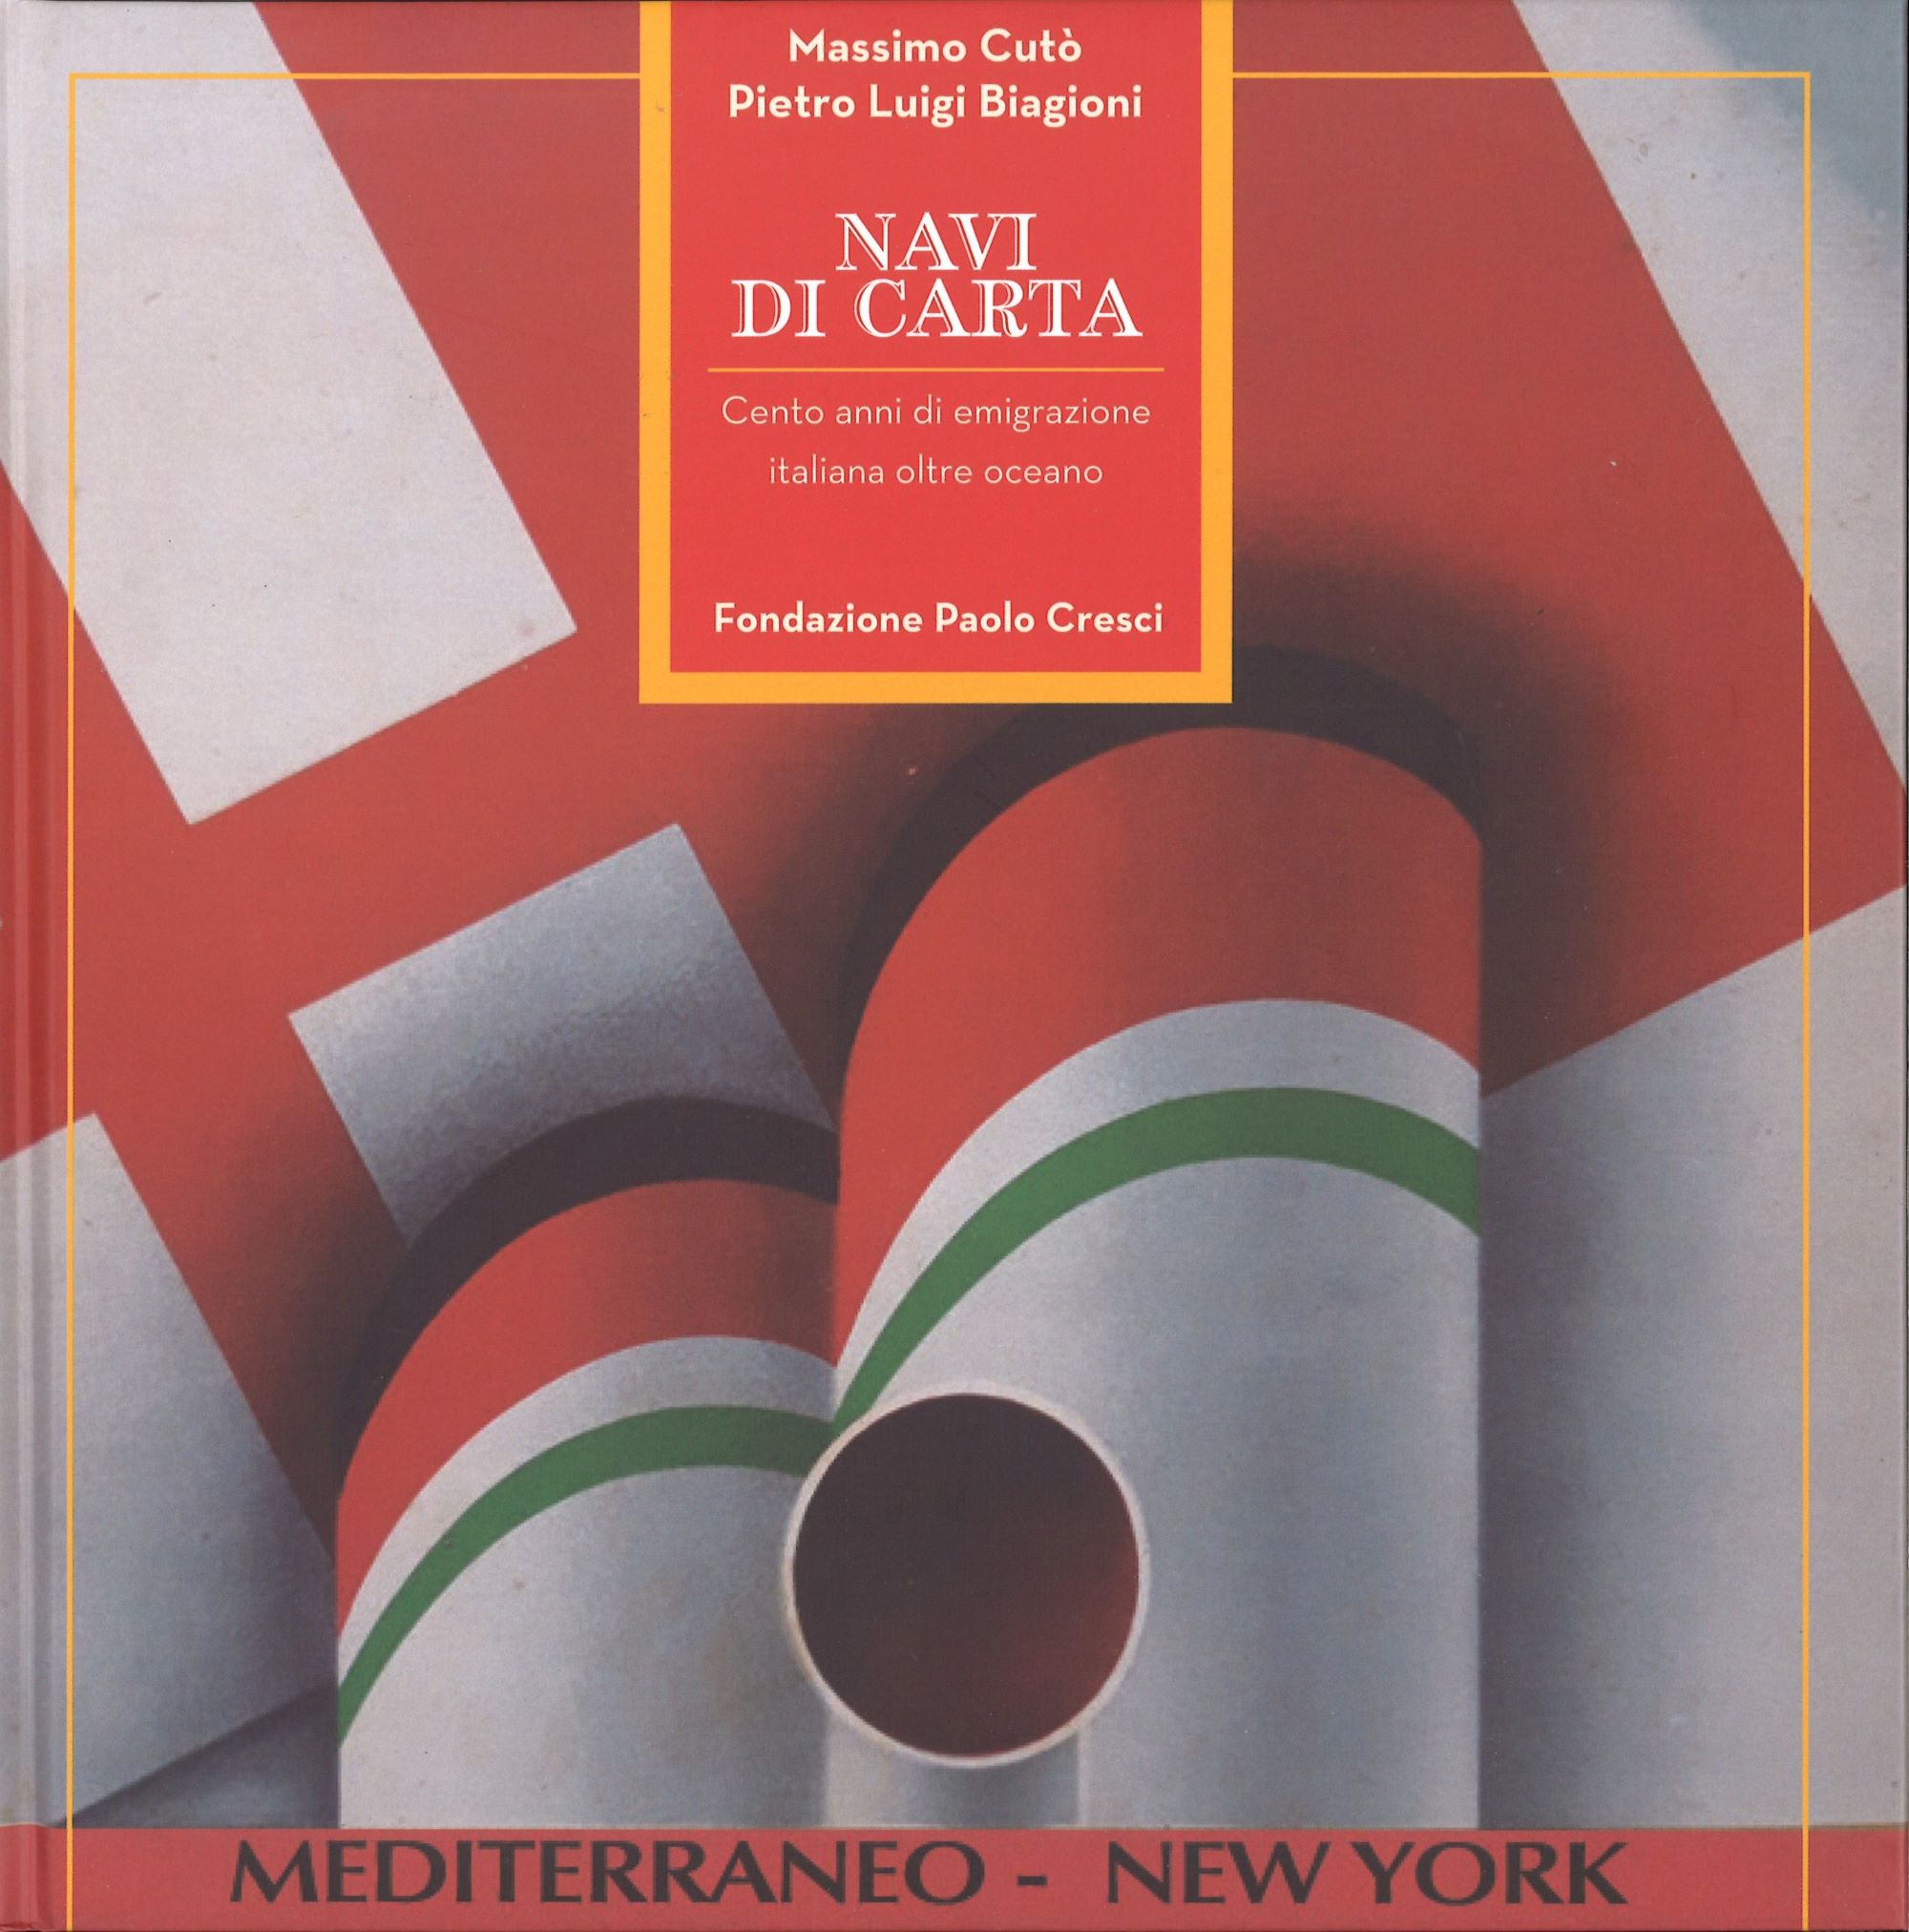 Massimo Cutò, Pietro Luigi Biagioni, <em>Paper Ships. One Hundred Years of Emigration Overseas</em>; Images and Documents from the Massimo Cutò Collection and the Paolo Cresci Foundation Archives; Introductory essay by Franco Cardini, Lucca, Paolo Cresci Foundation for the History of Italian Emigration 2022.